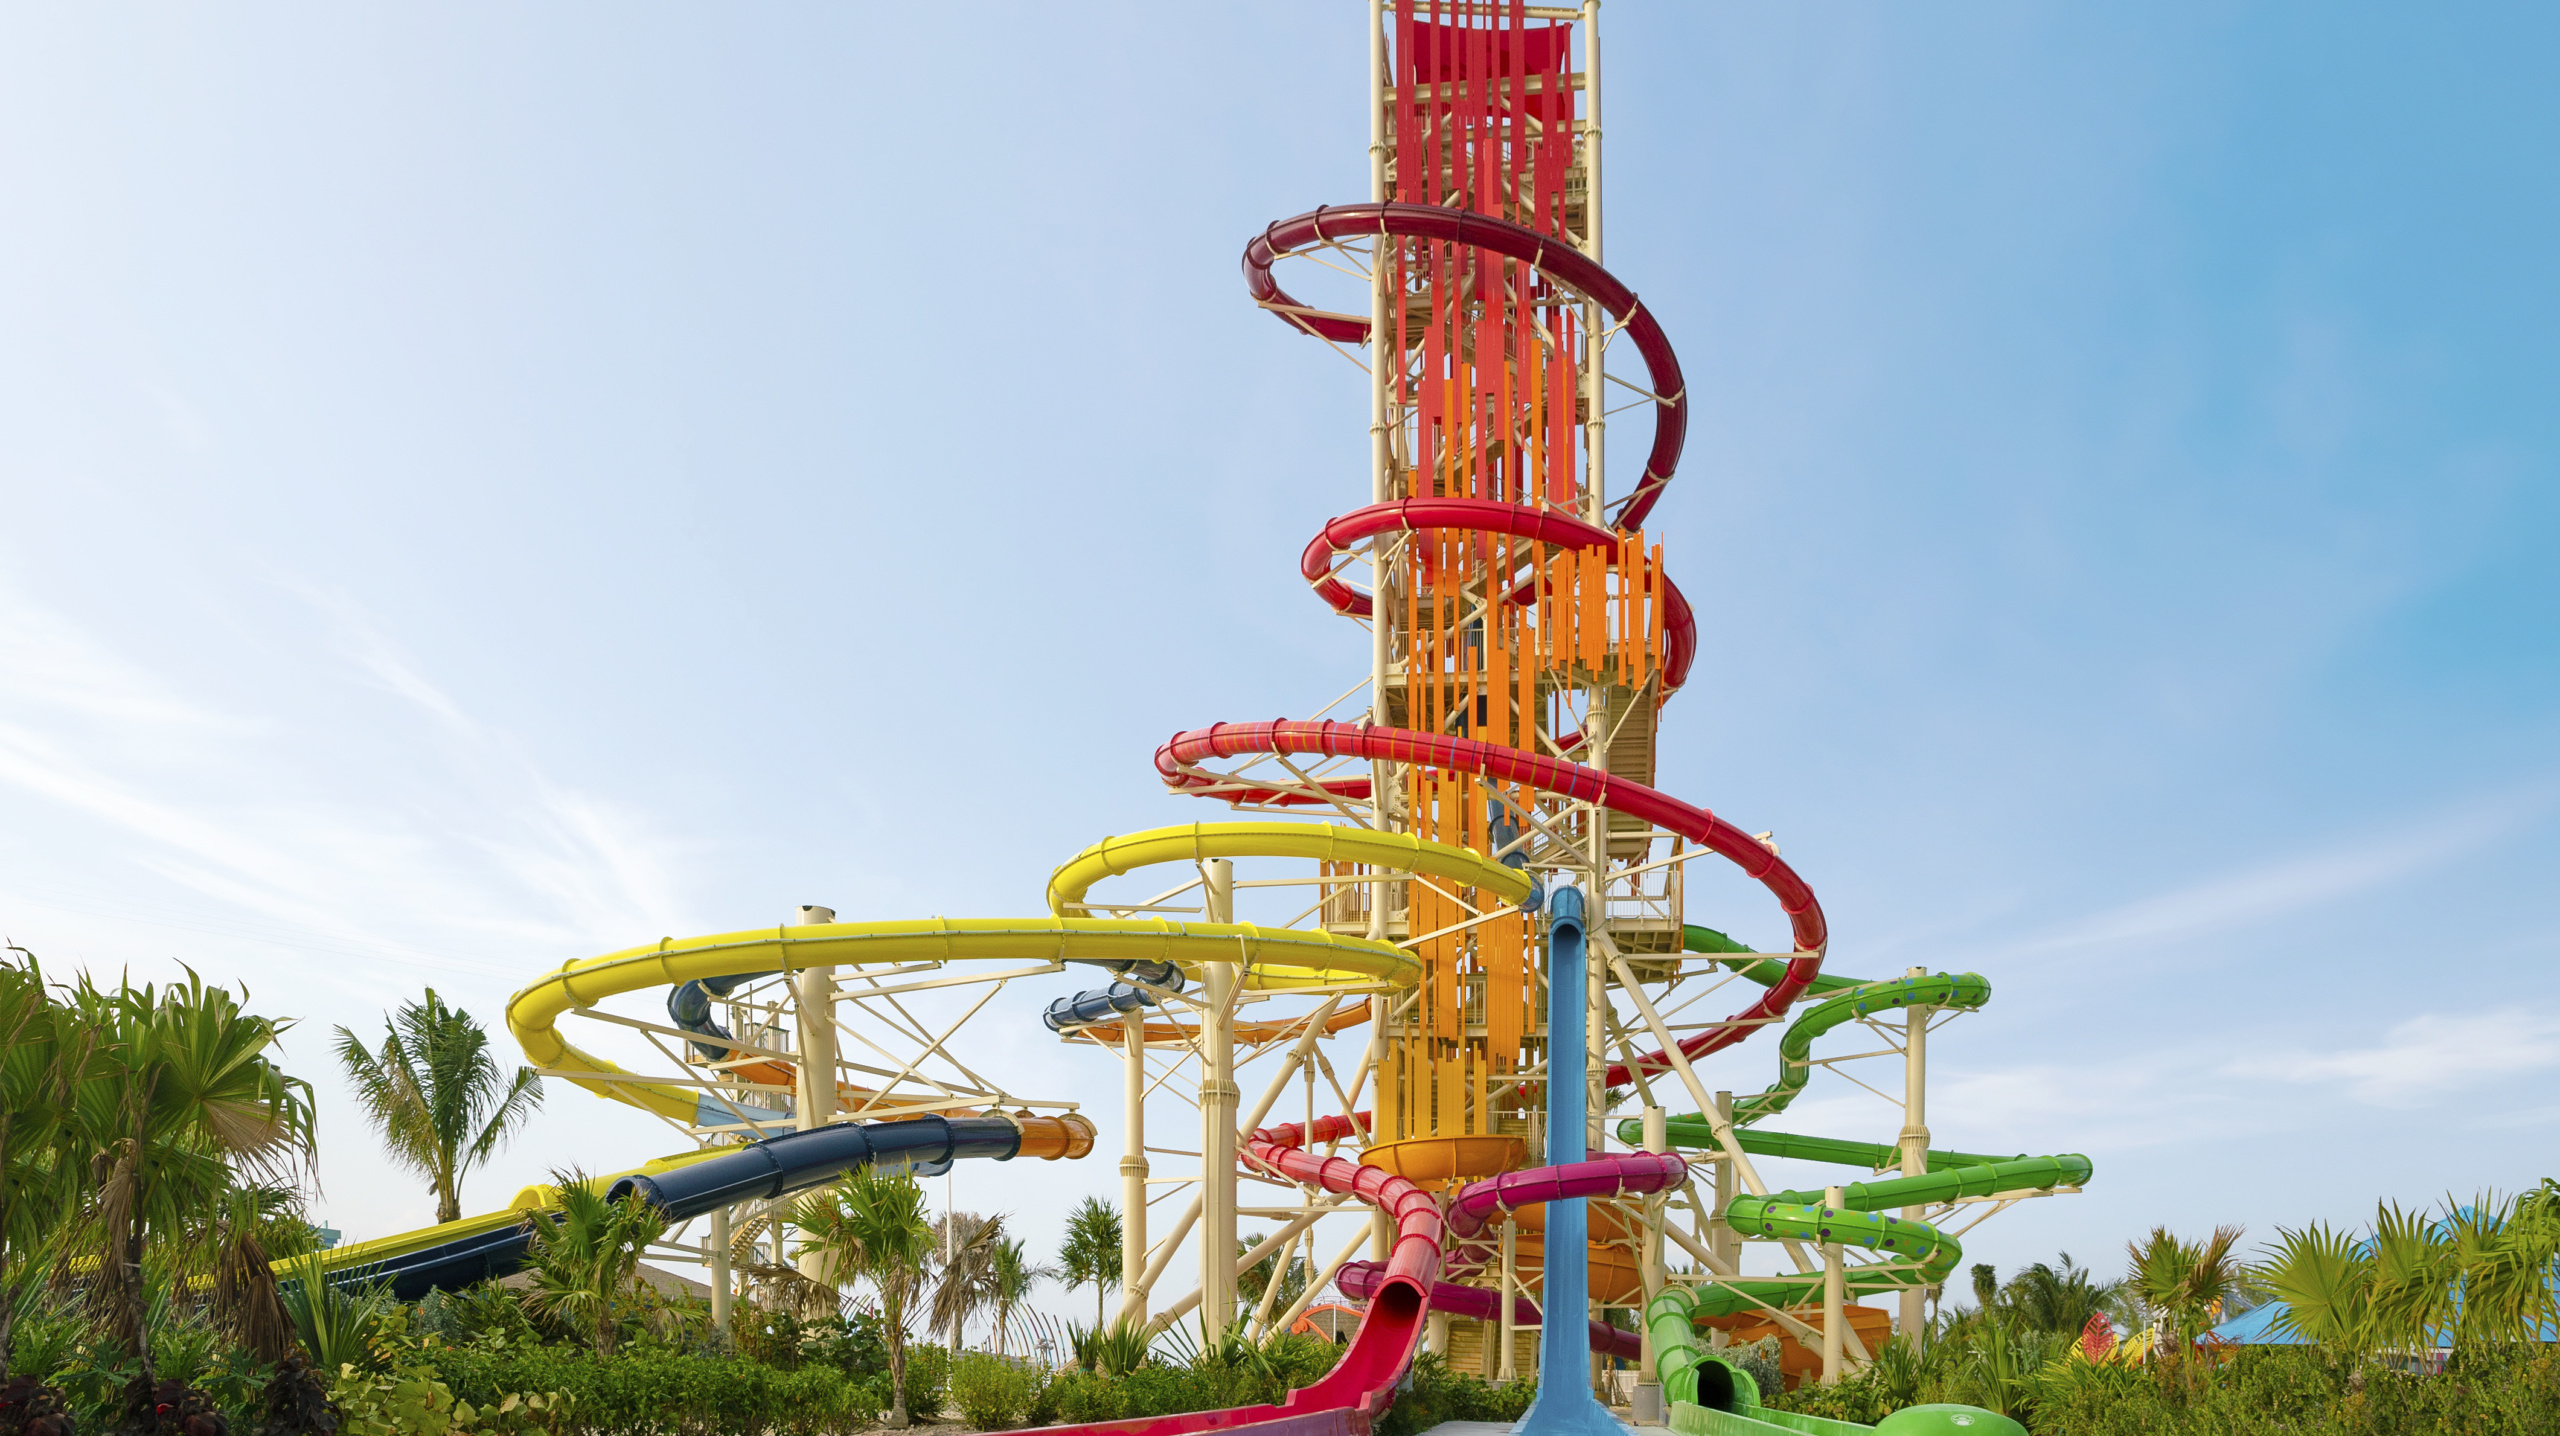 Best and Most fun Thrill Tower - themed - Best Water Slide Designer WhiteWater West - Perfect Day at CoCoCay, The Bahamas